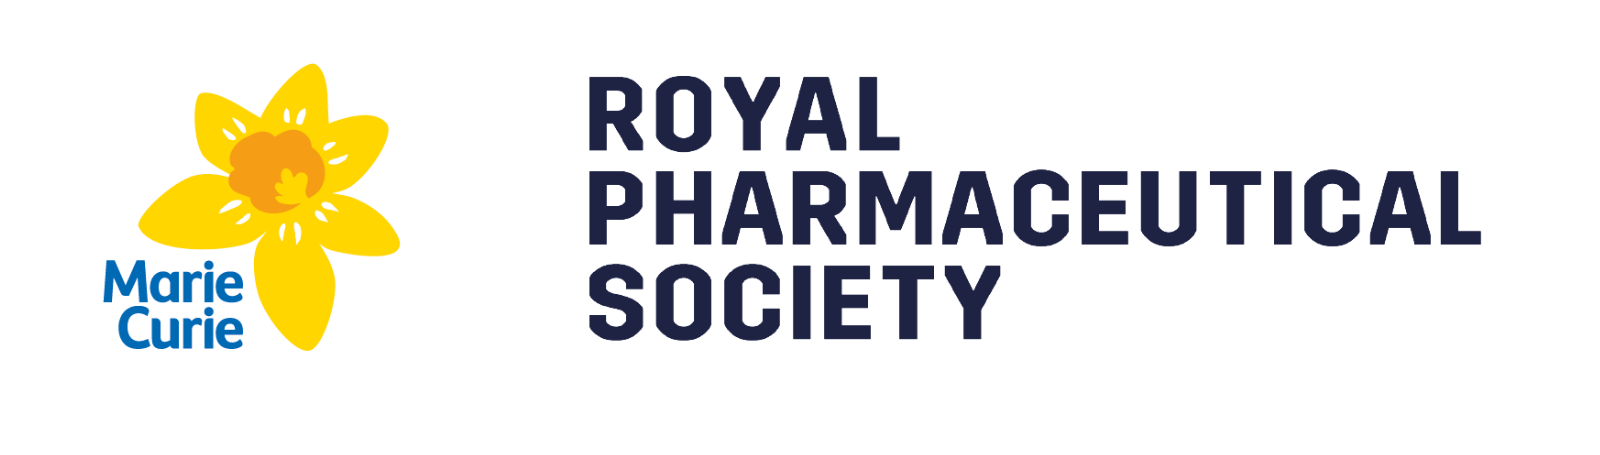 Marie Curie and Royal Pharmaceutical Society logos